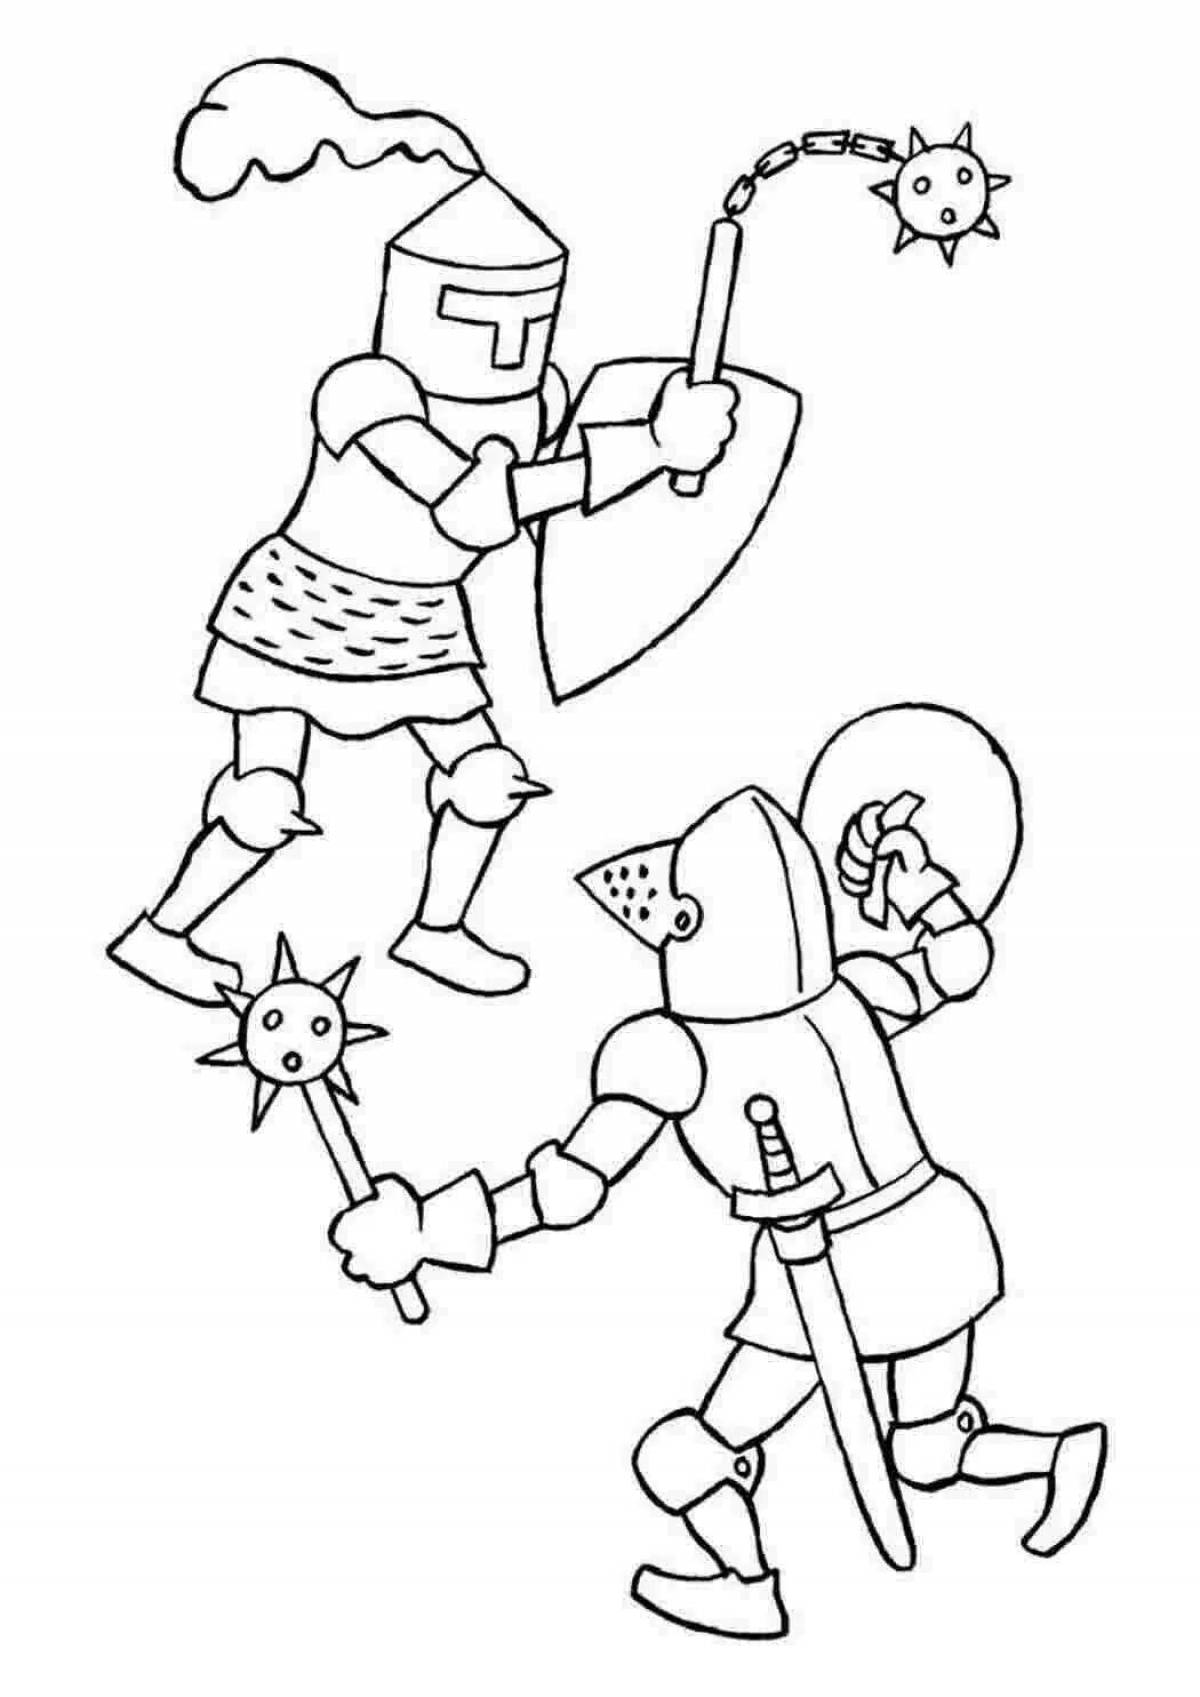 Amazing coloring book for knight boys